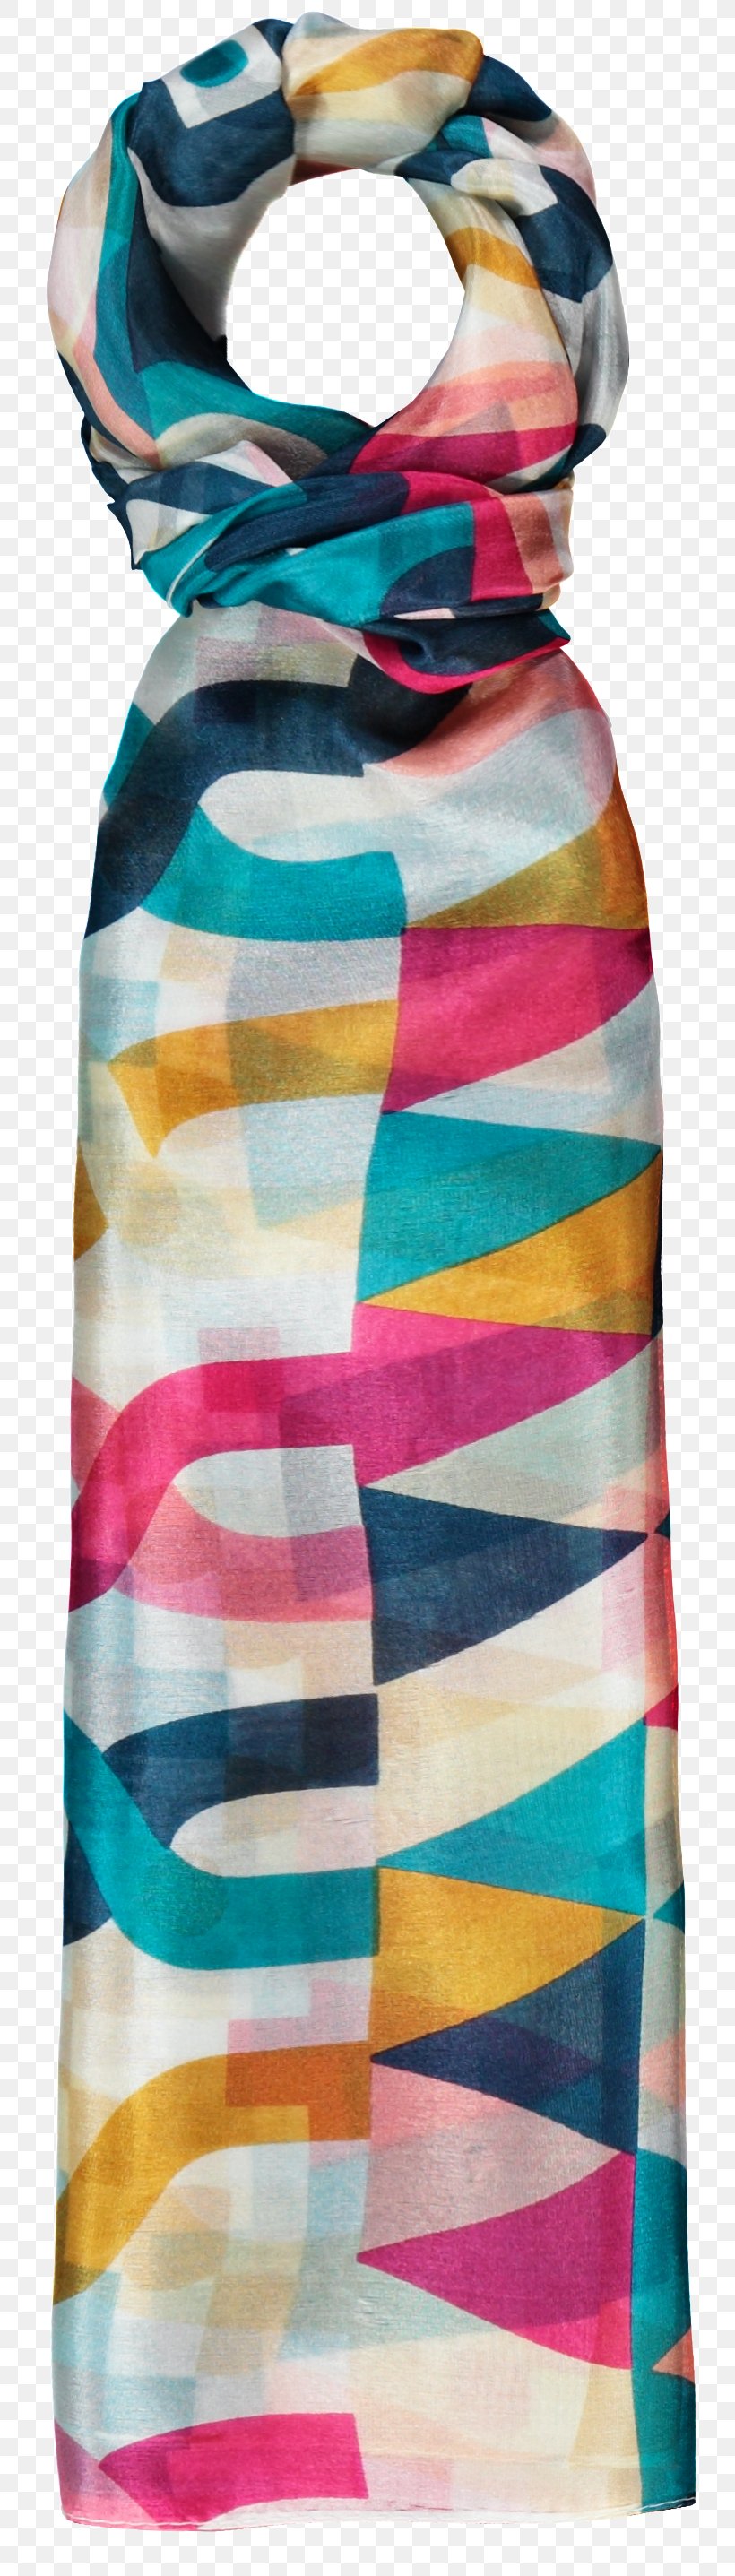 Scarf Stole Dress, PNG, 767x2874px, Scarf, Clothing, Day Dress, Dress, Stole Download Free